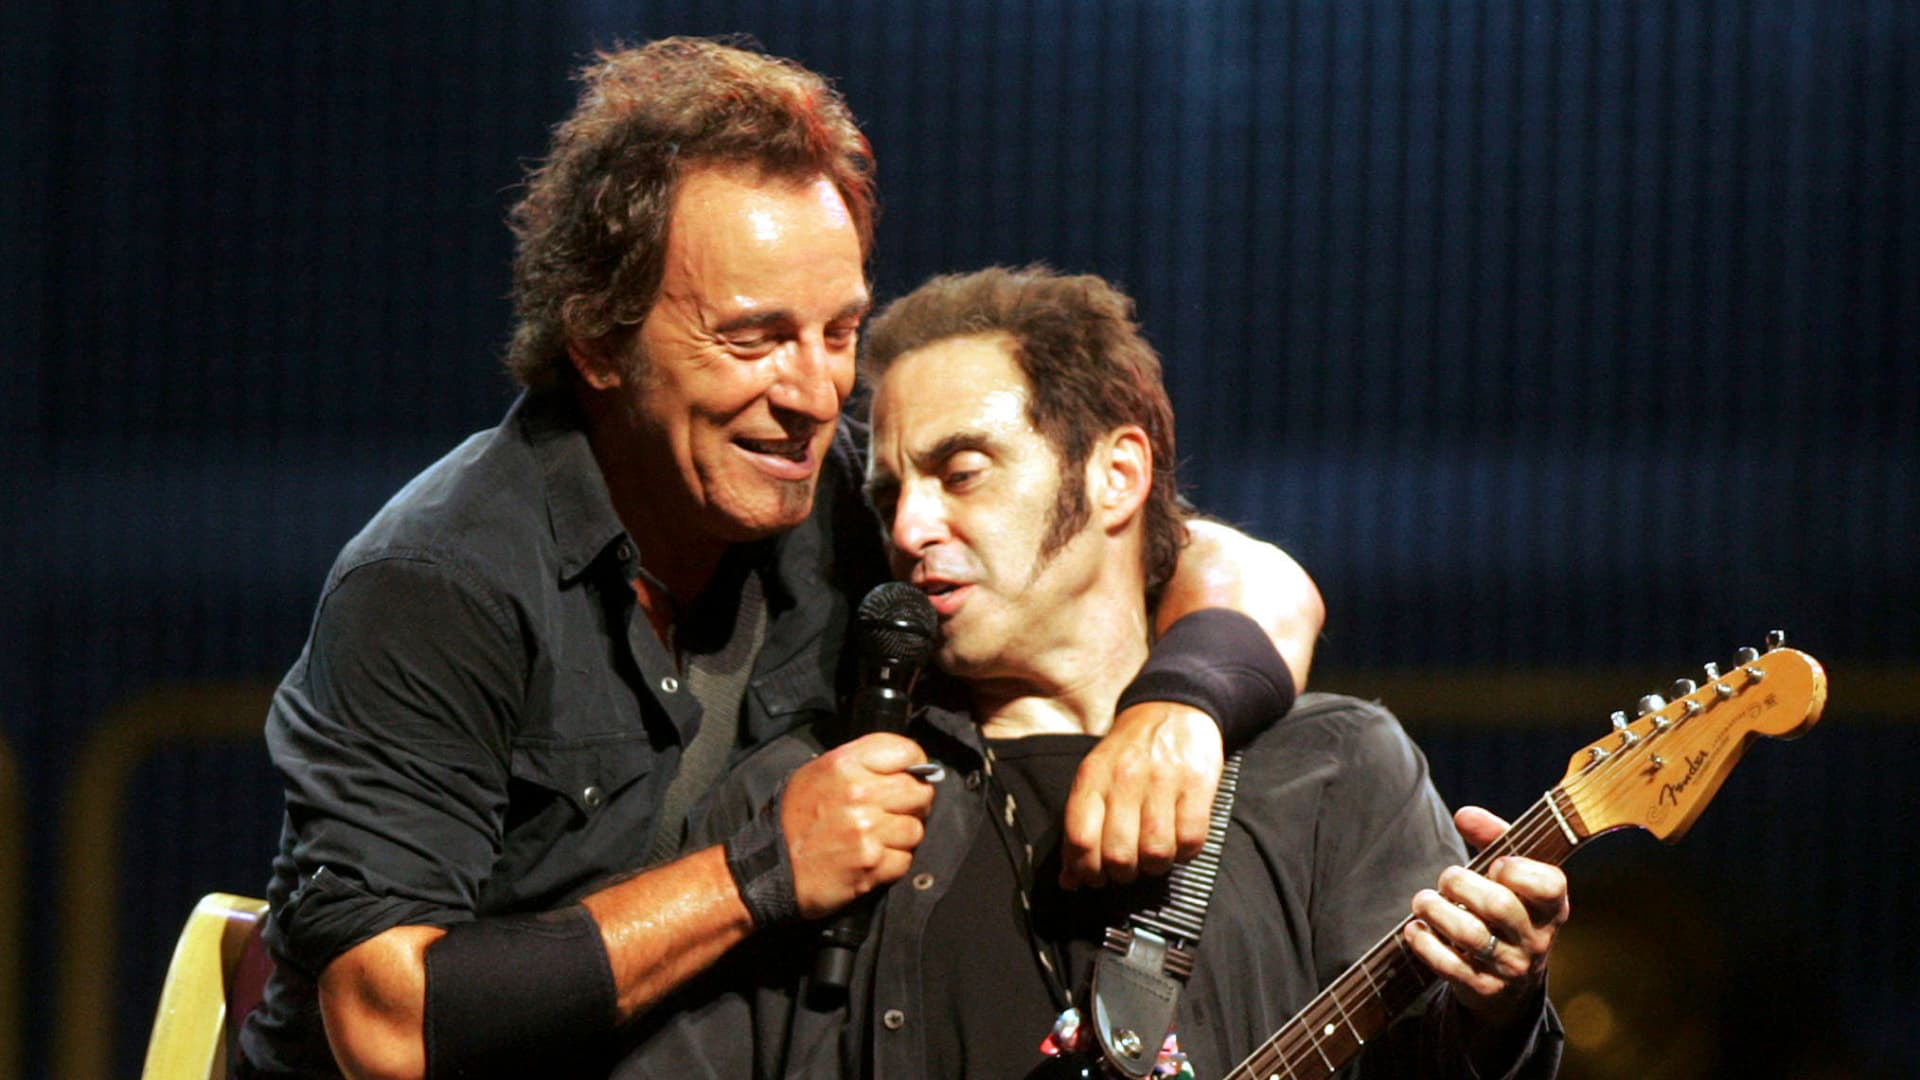 Bruce Springsteen (L) and Nils Lofgren with the E Street Band perform at Veterans Park in celebration of the 105th anniversary of Harley-Davidson motorcycles in Milwaukee, Wisconsin August 30, 2008.